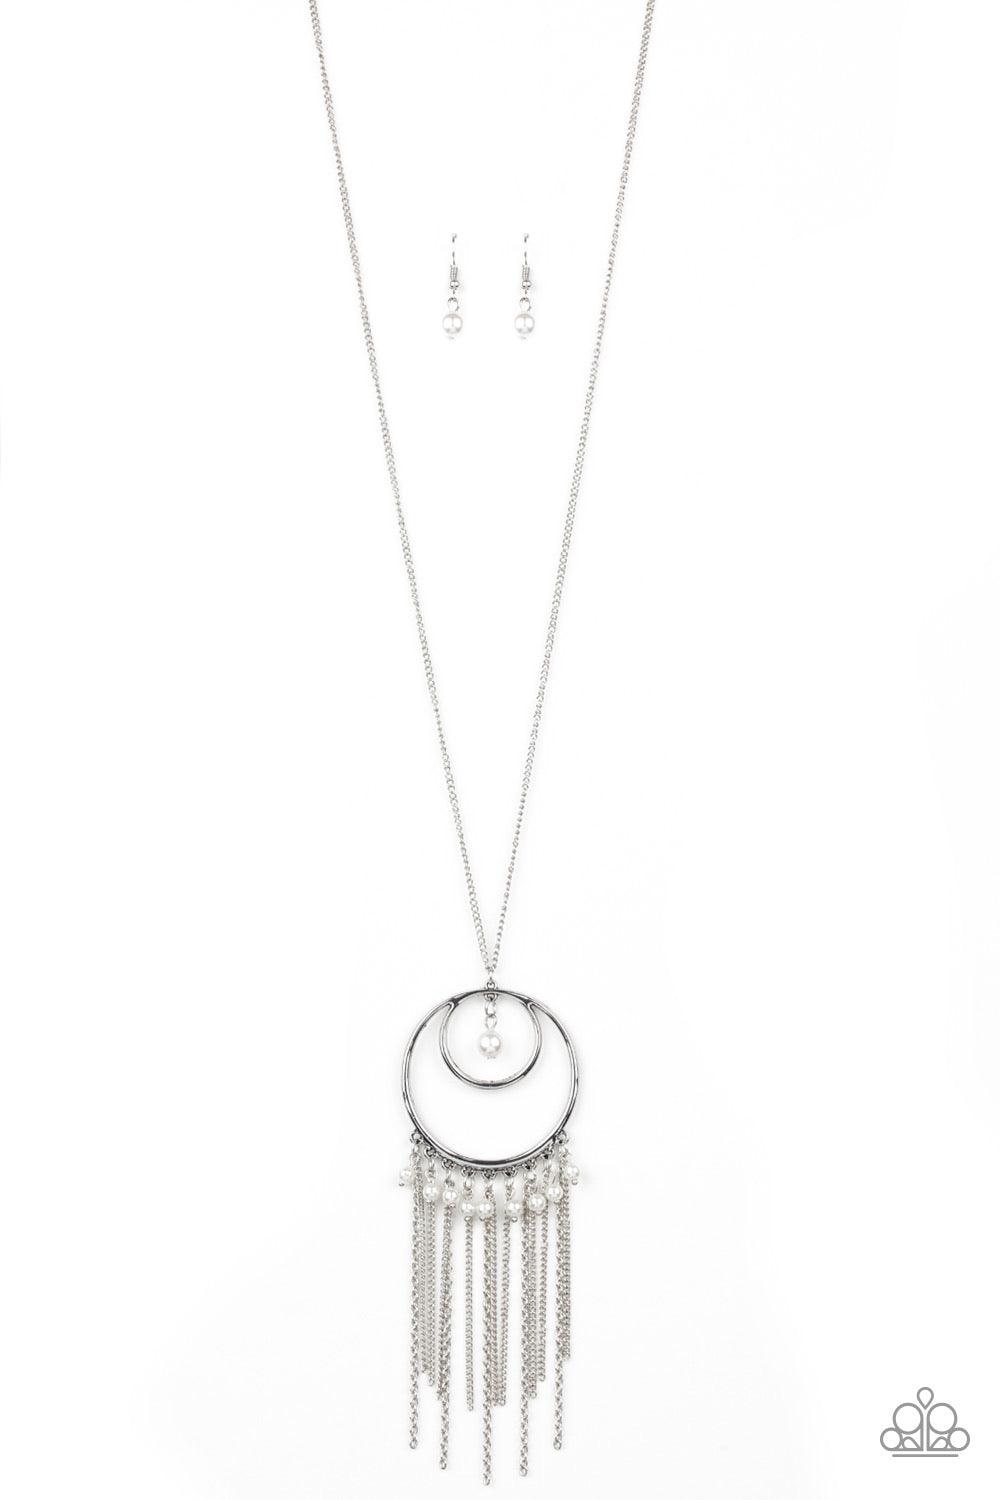 Paparazzi Accessories Out of Bounds Shimmer - White An airy circular pendant swings from the bottom of a lengthened silver chain. Infused with a solitaire white pearl swinging from the top of the frame, a fringe of white pearls and shimmery silver chains